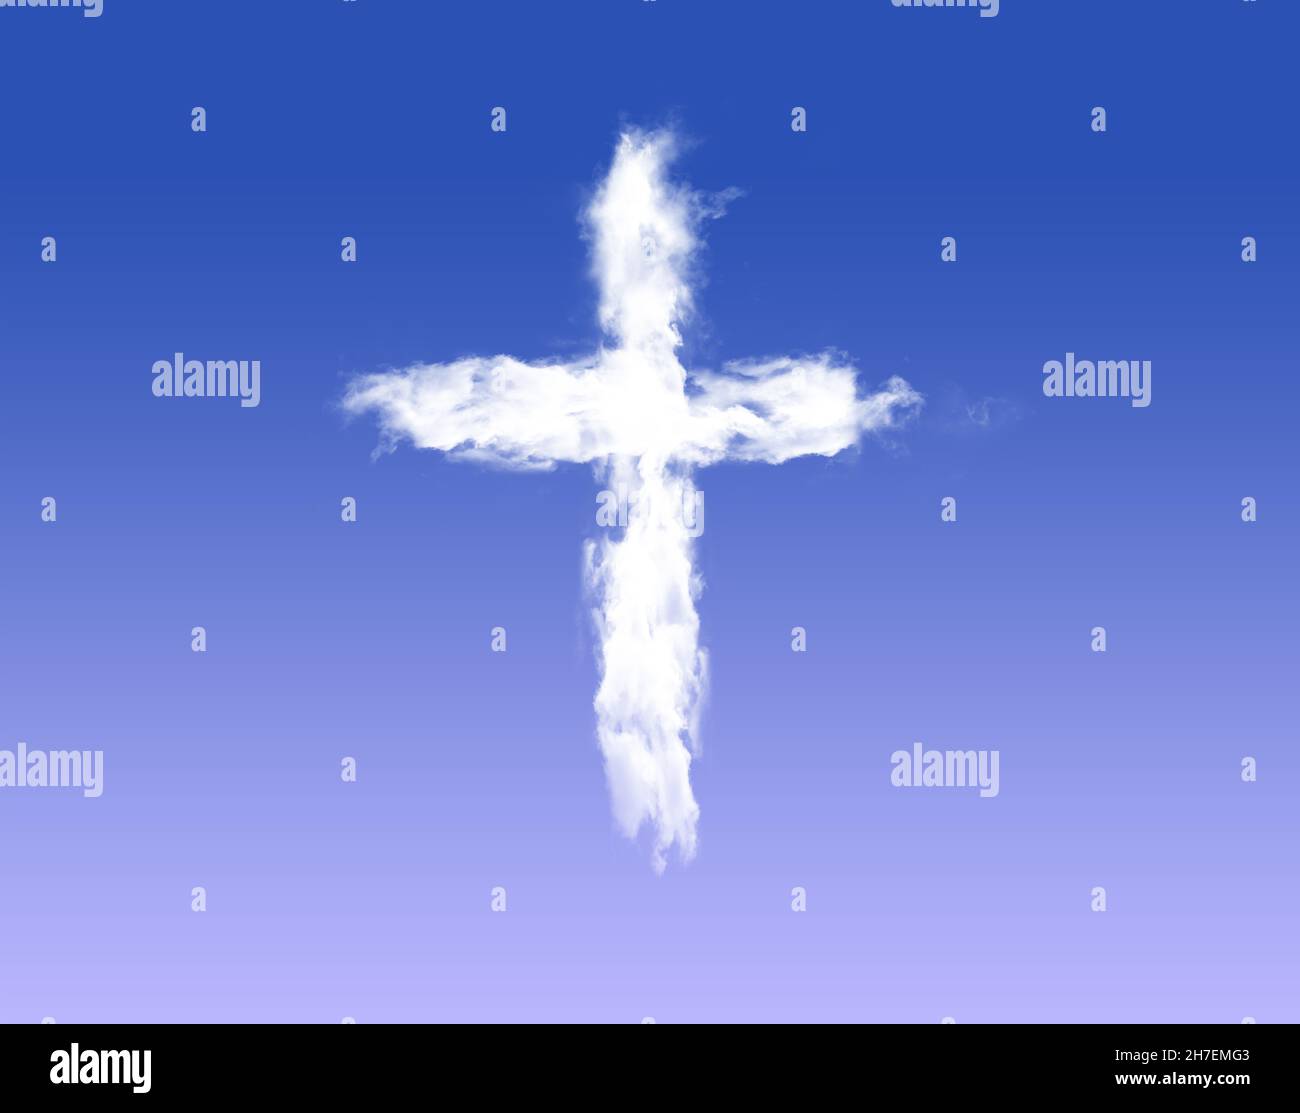 White cross shaped cloud flying in the deep blue sky. Smoke shape of a crucifixion illustration Stock Photo